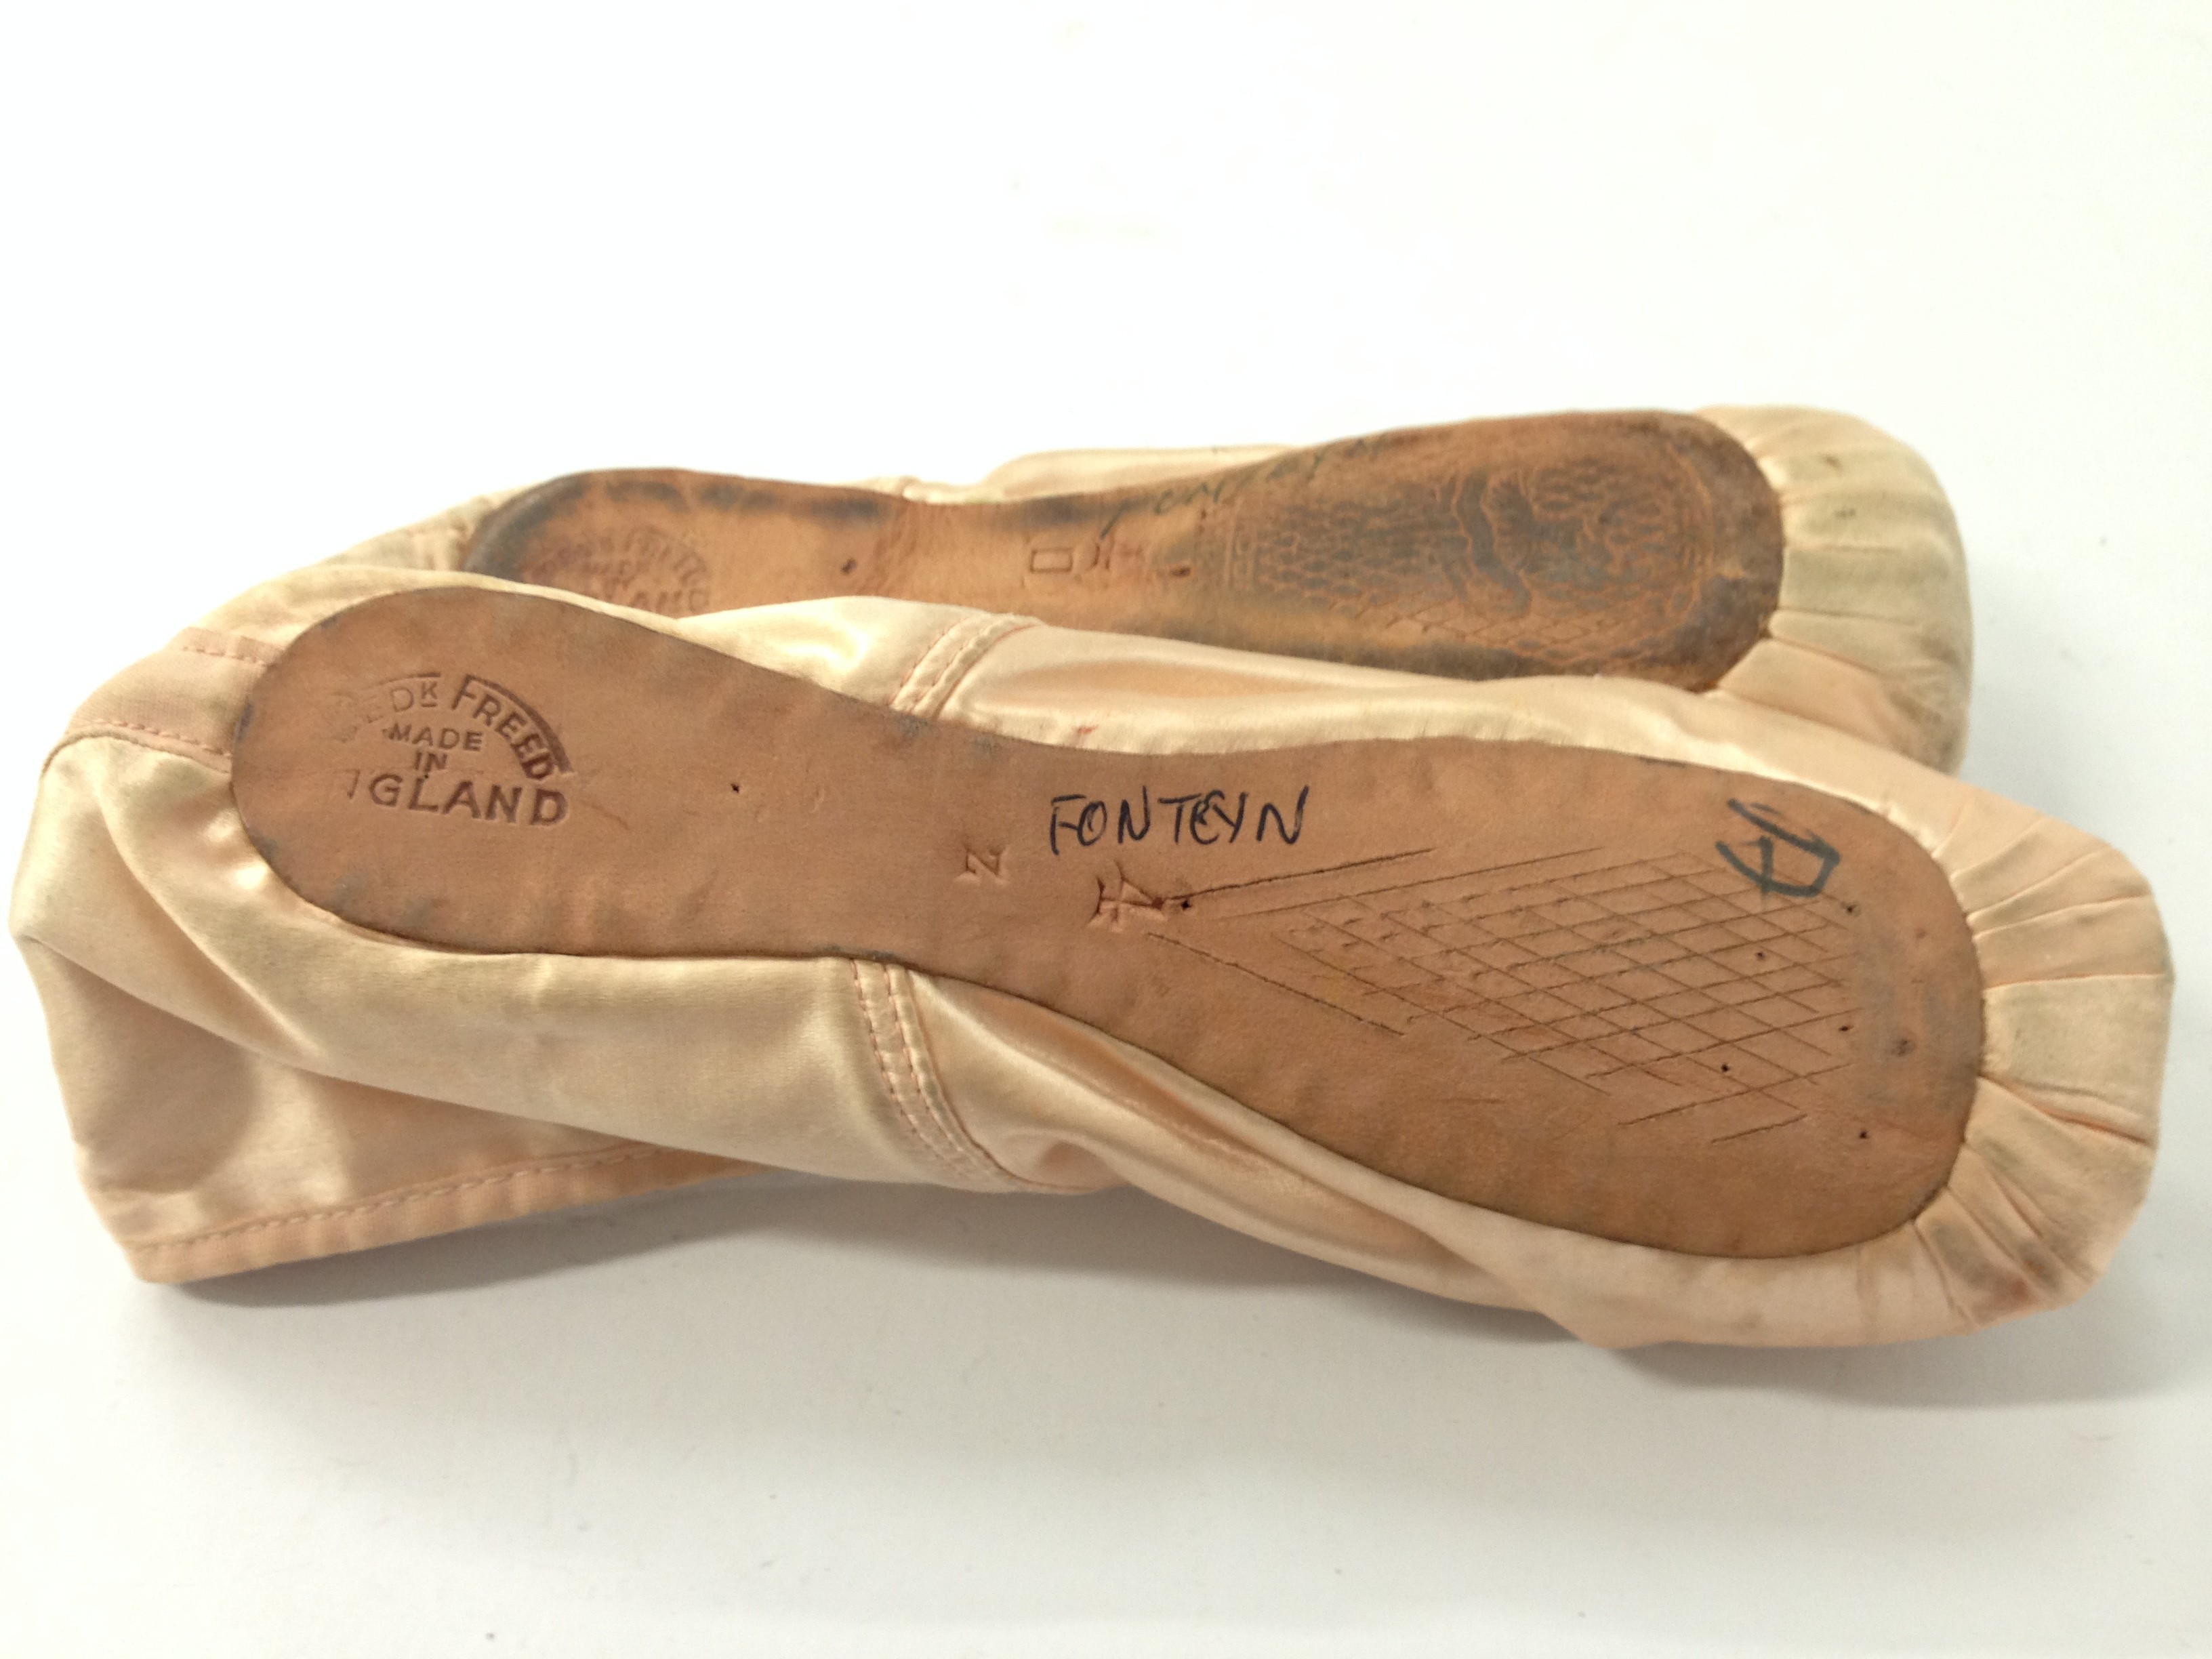 Margot Fonteyn: Signed pair of pink ballet shoes together with a signed ...